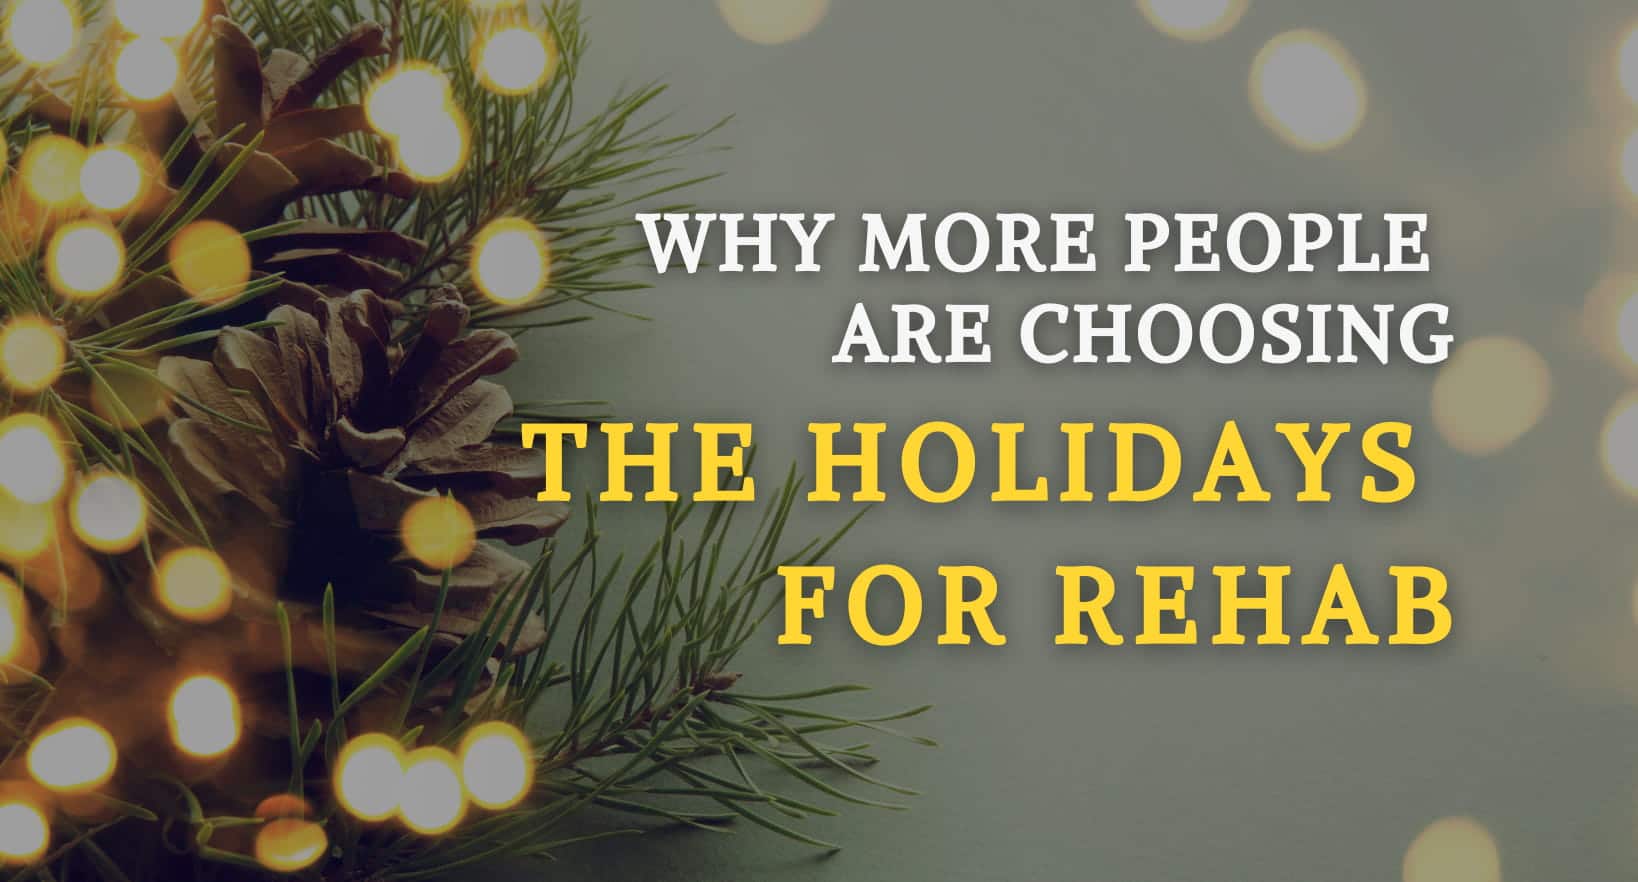 Why more people are choosing the holidays for rehab.